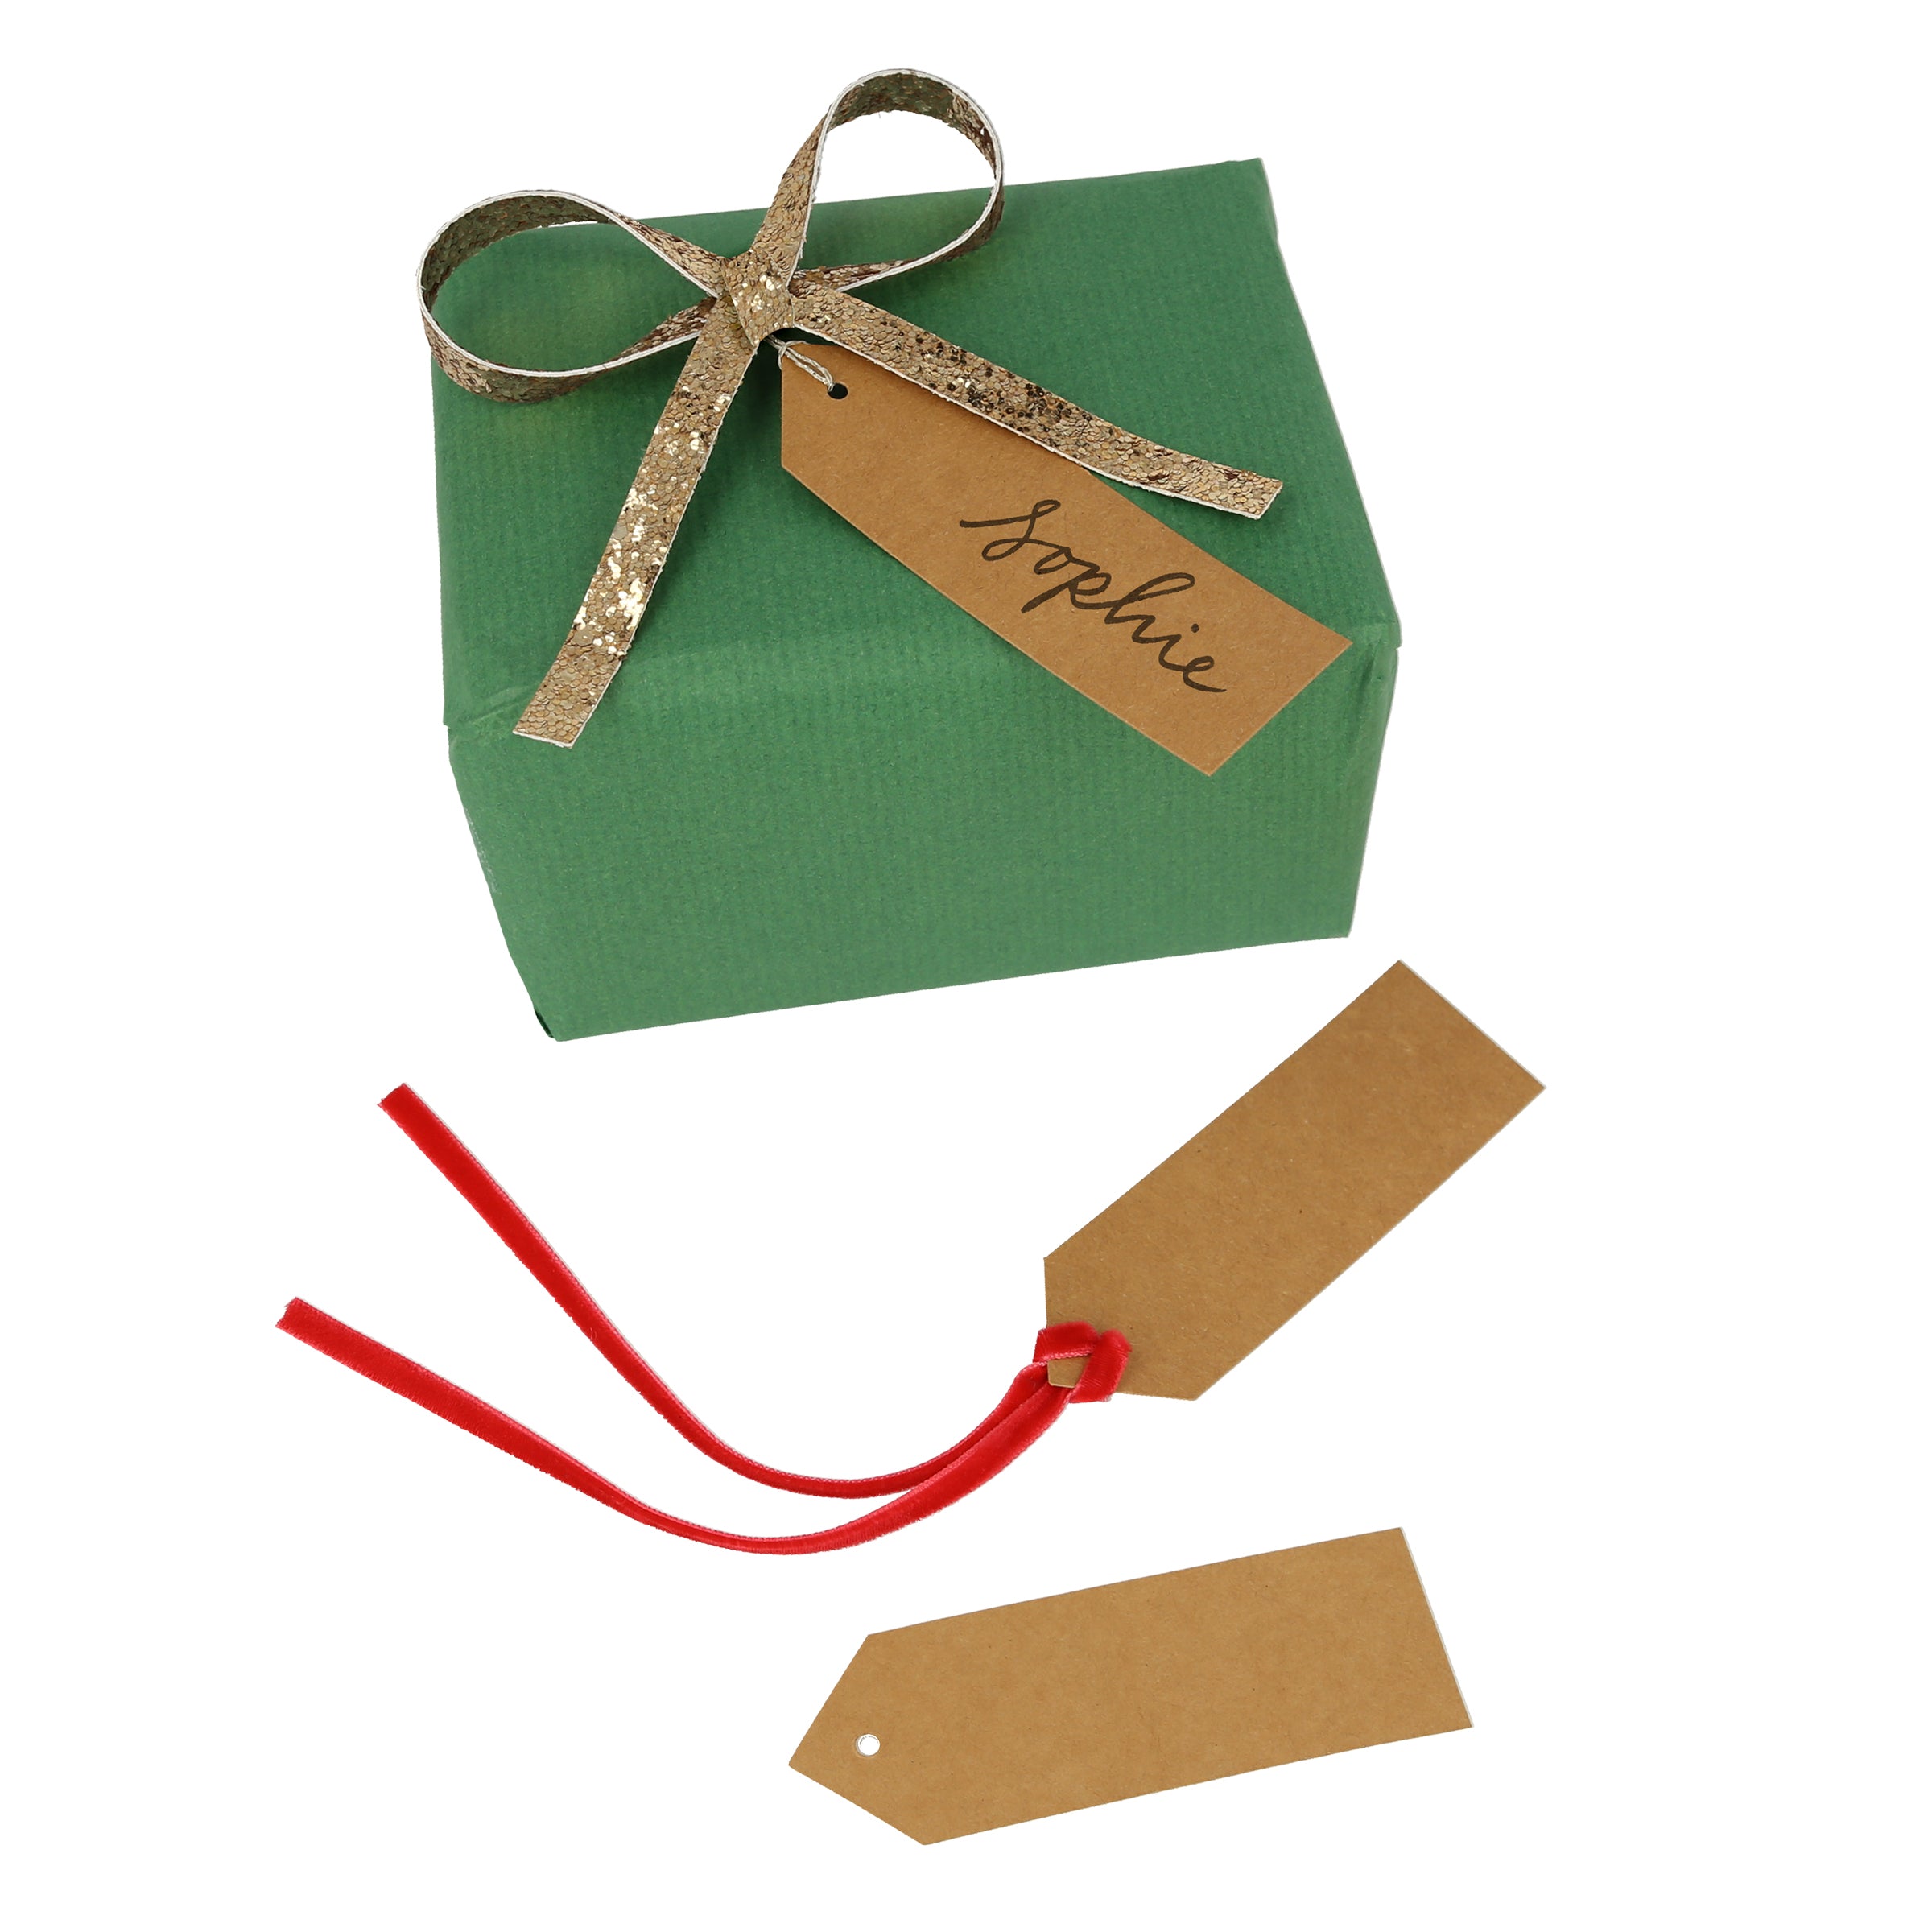 If you're looking for Christmas gift wrapping ideas you'll love our elegant gold bows.